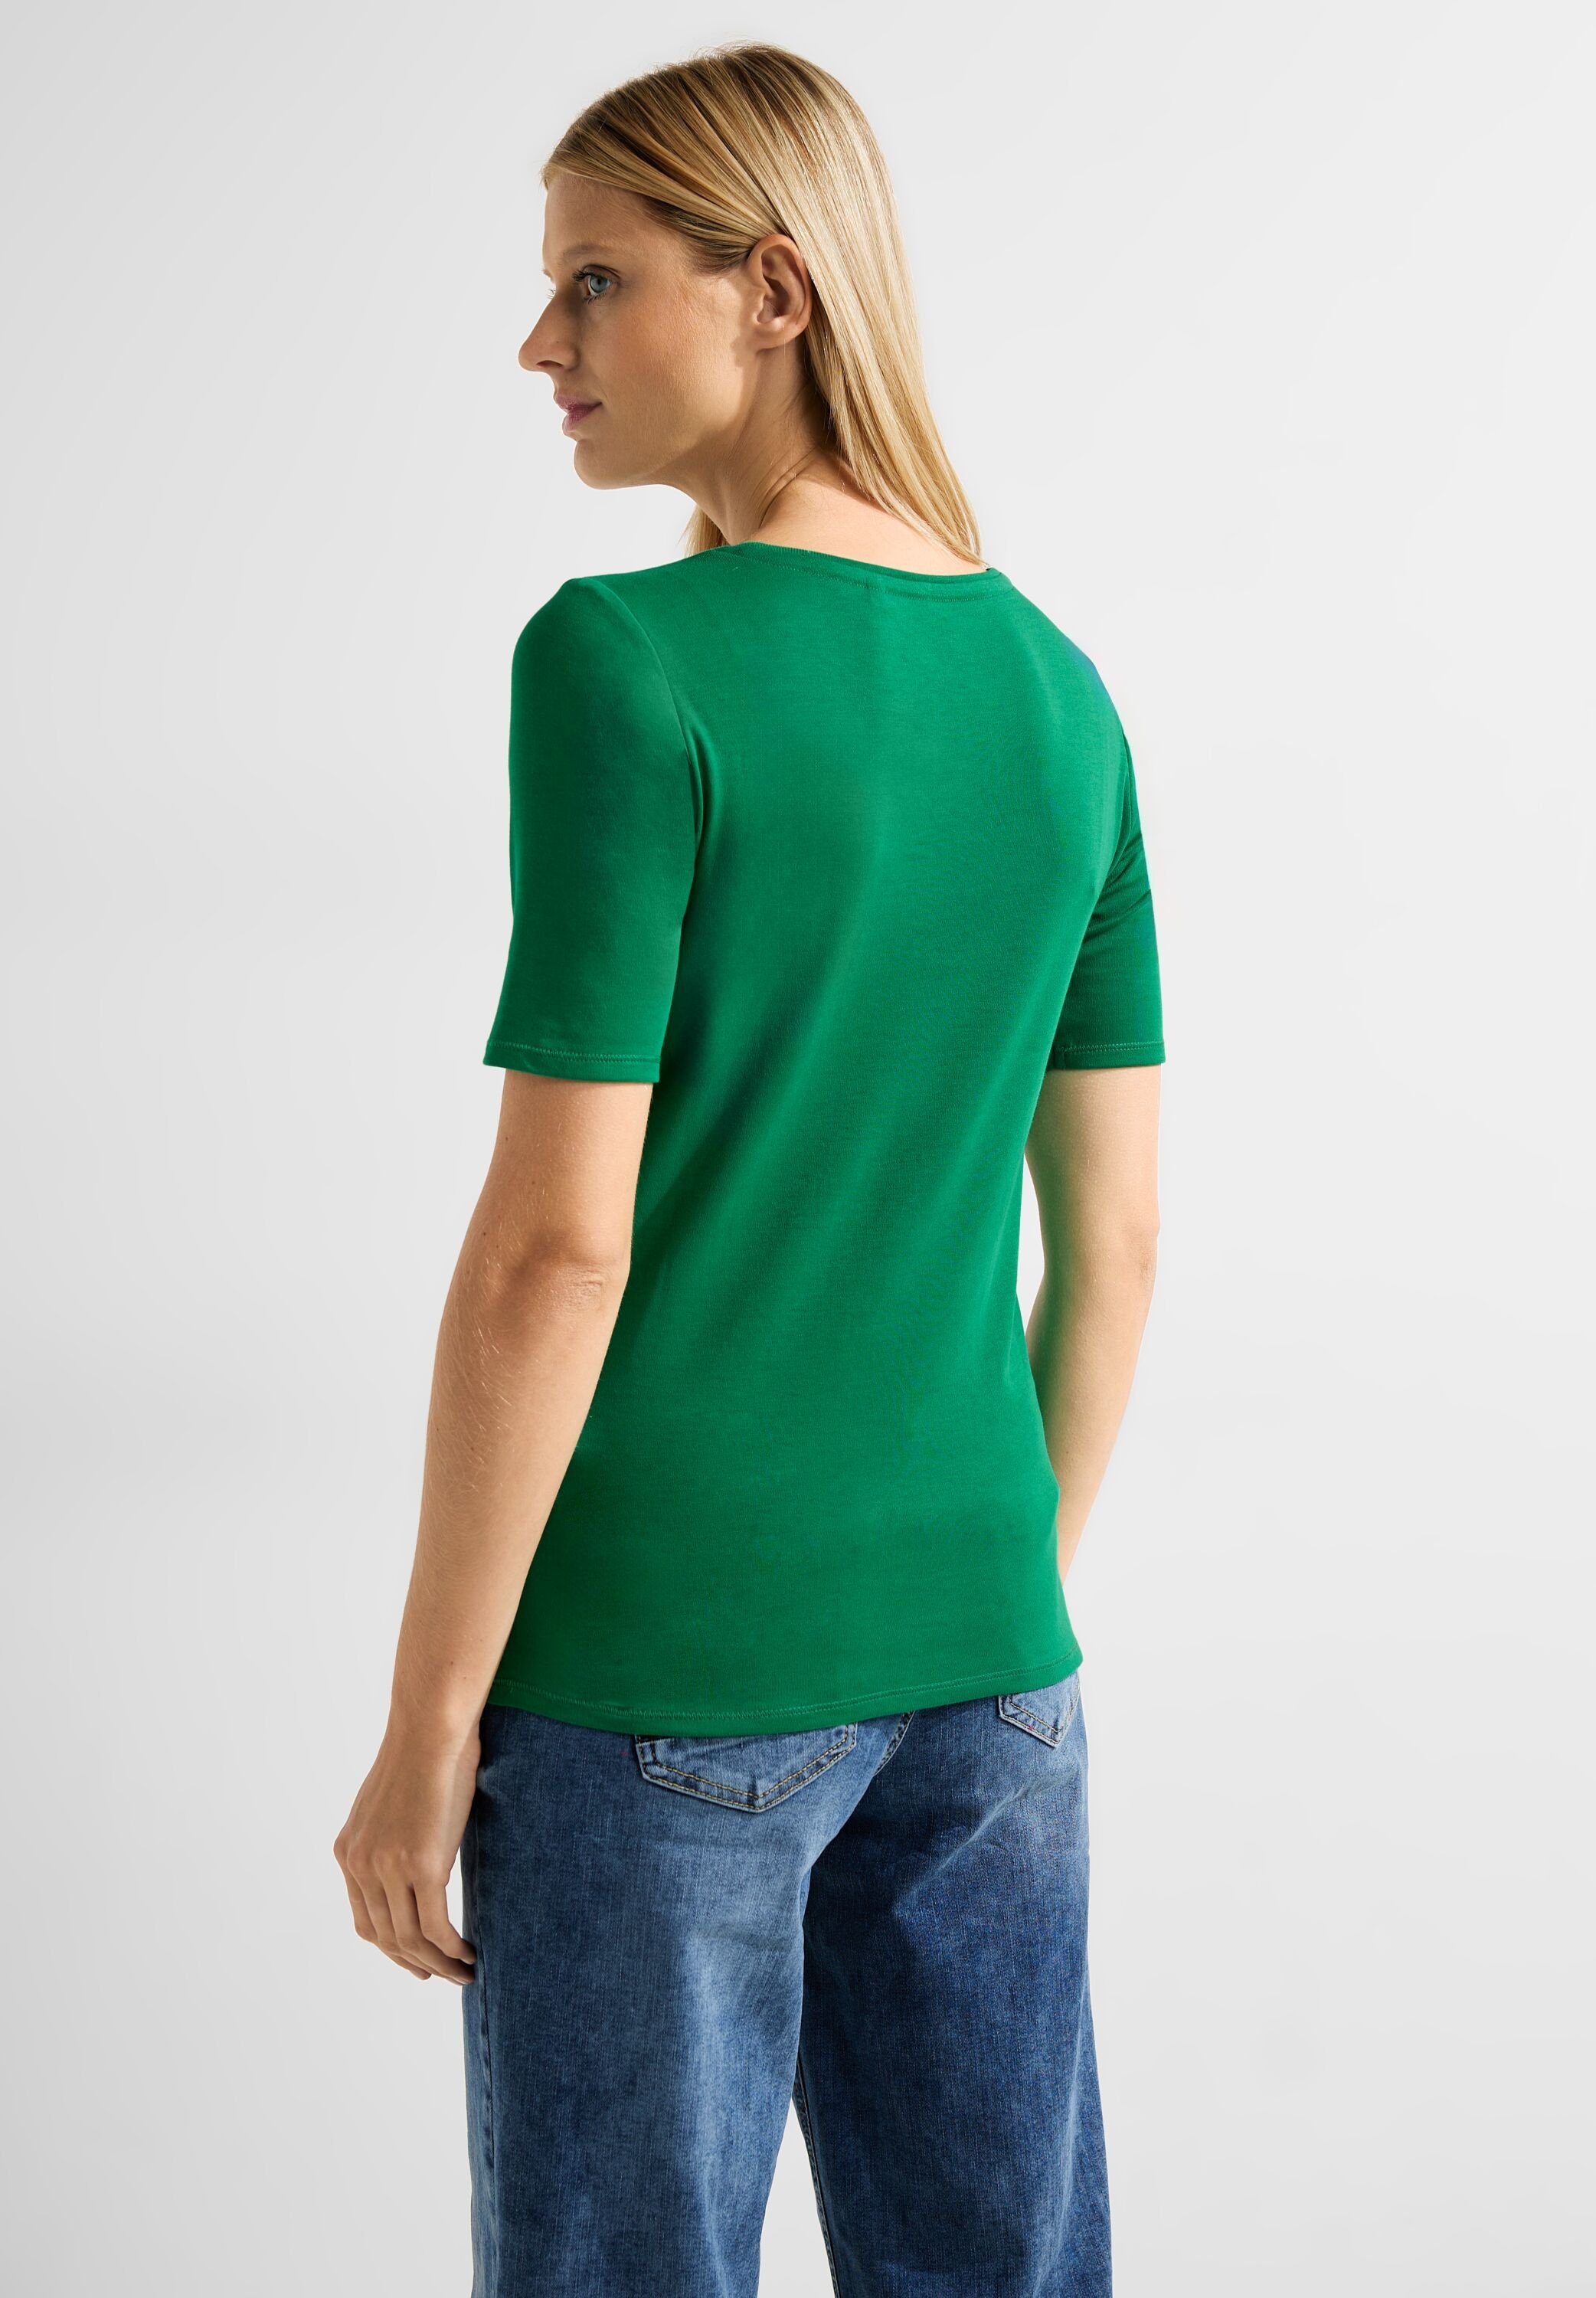 easy Cecil Unifarbe T-Shirt green in